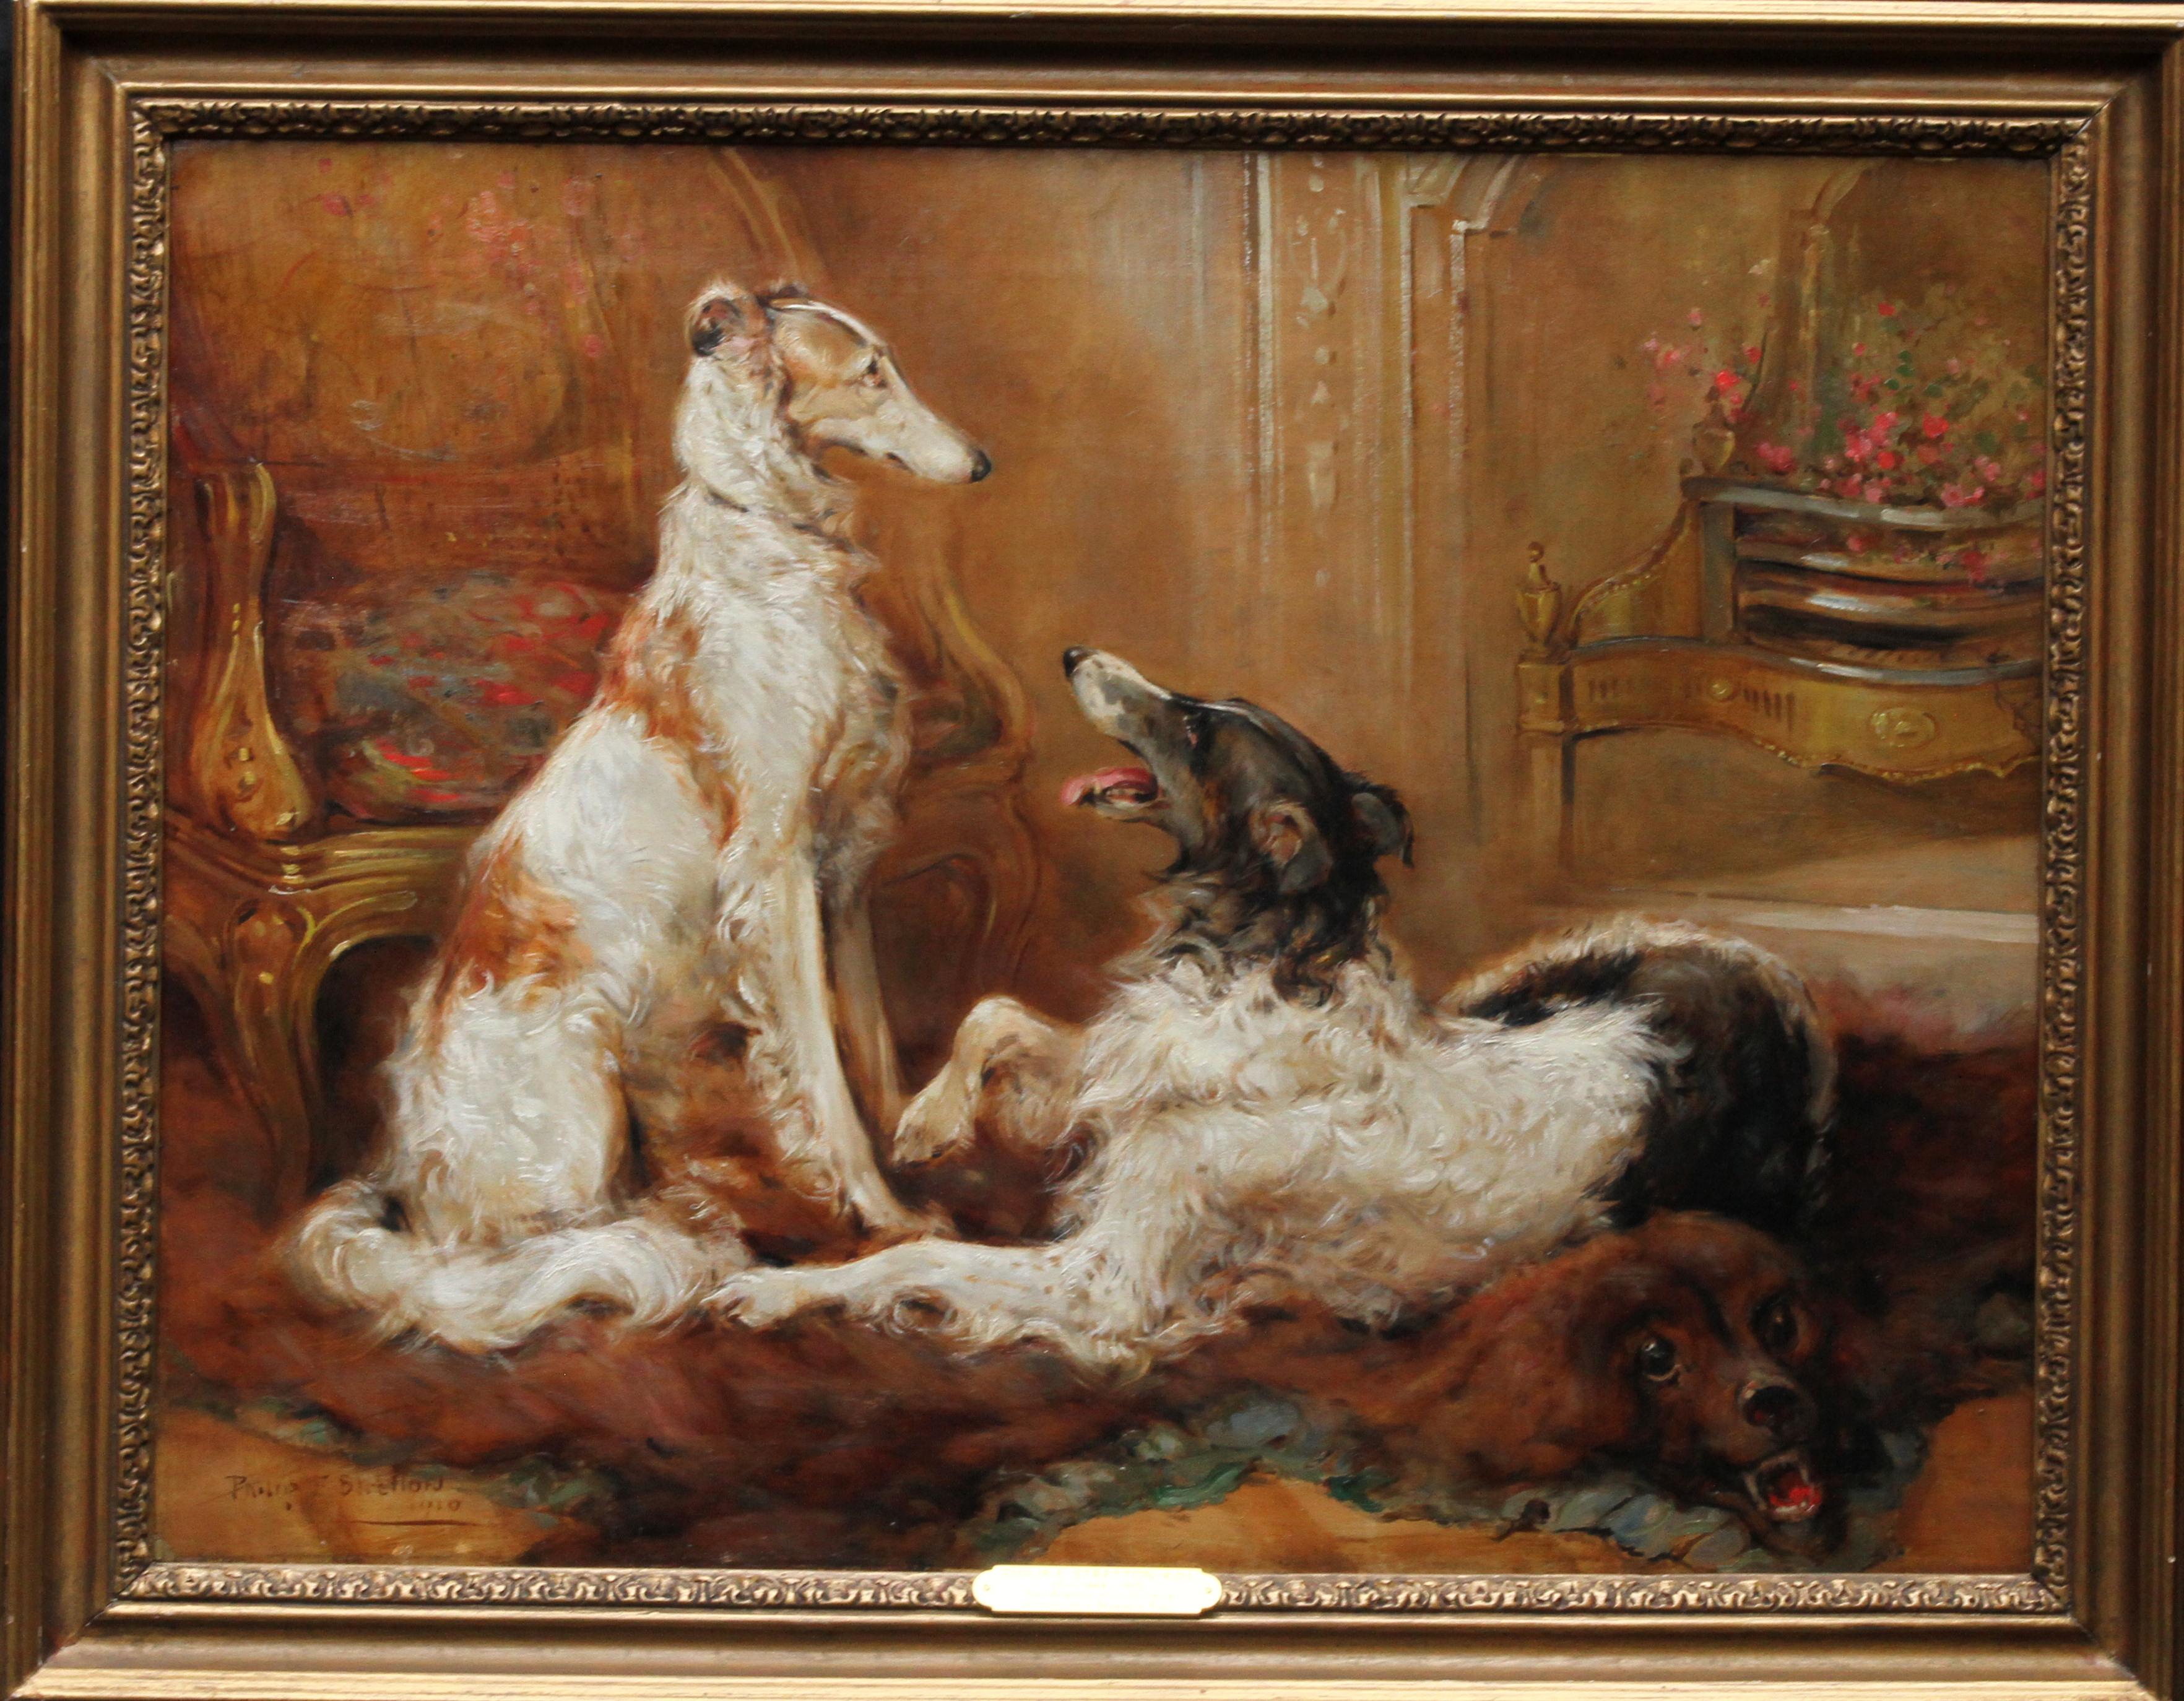 Philip Eustace Stretton Portrait Painting - Two Borzoi Dogs in an Interior - British Edwardian Dog Art Interior Oil Painting